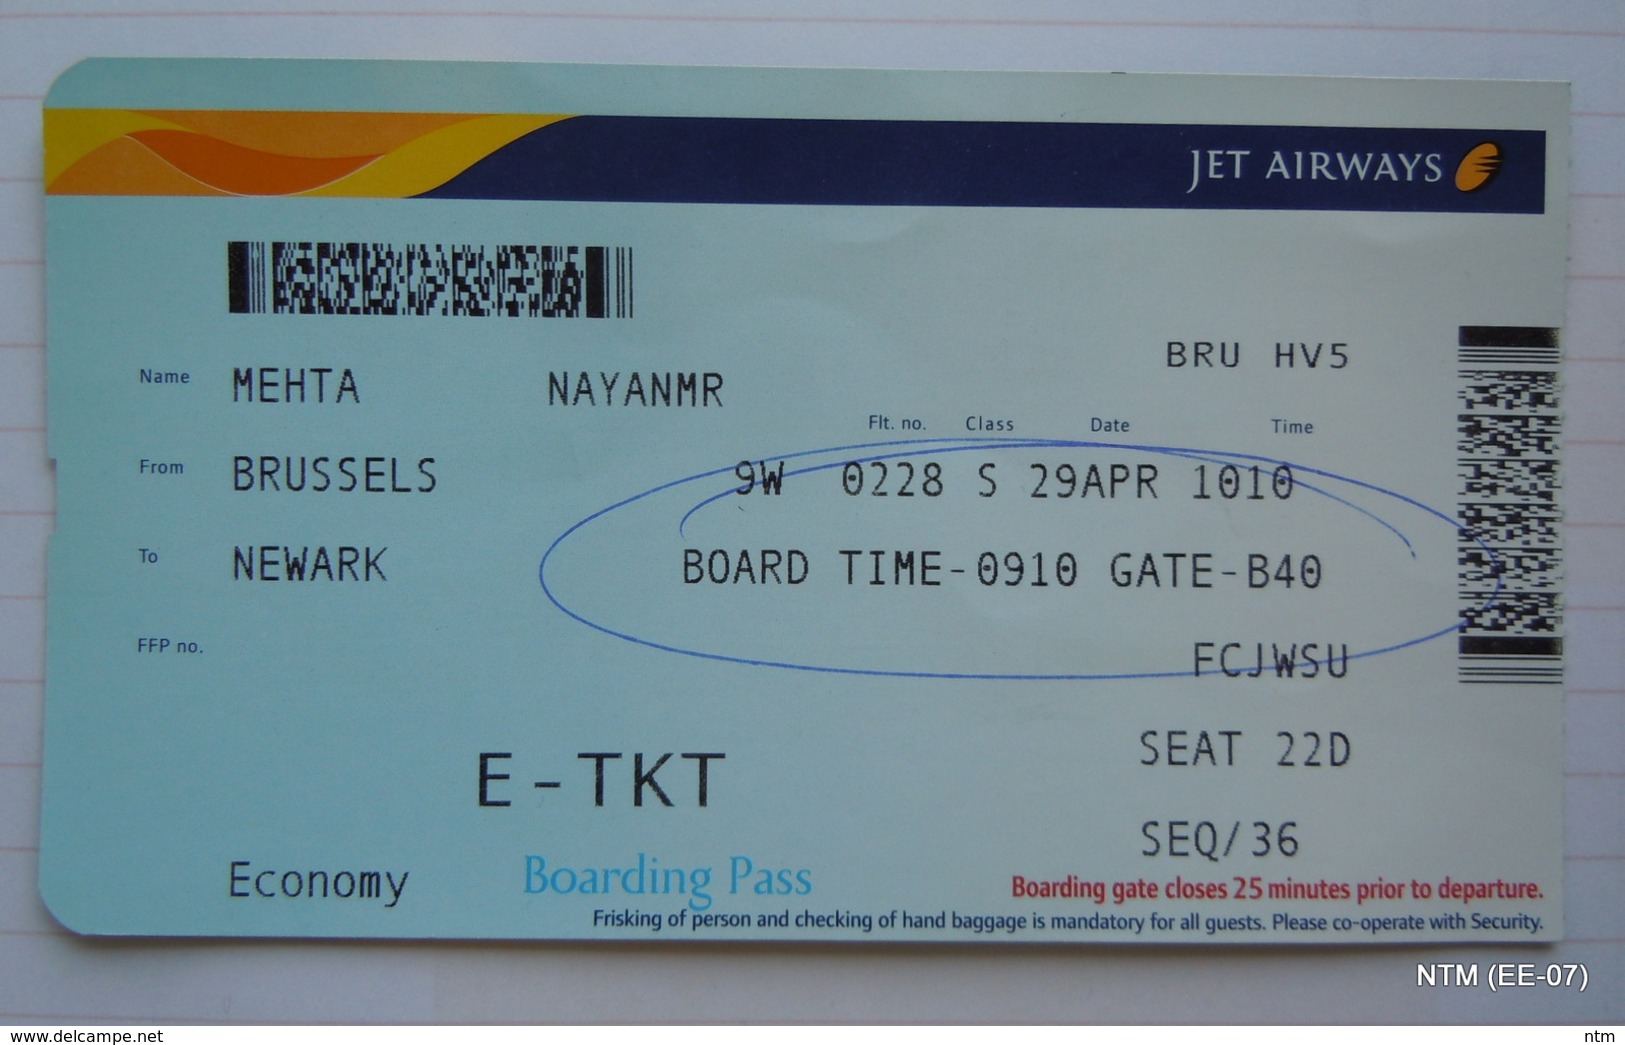 Jet Airways Boarding Pass: Brussels To Newark Travel Date: 29-04-2013 - Boarding Passes